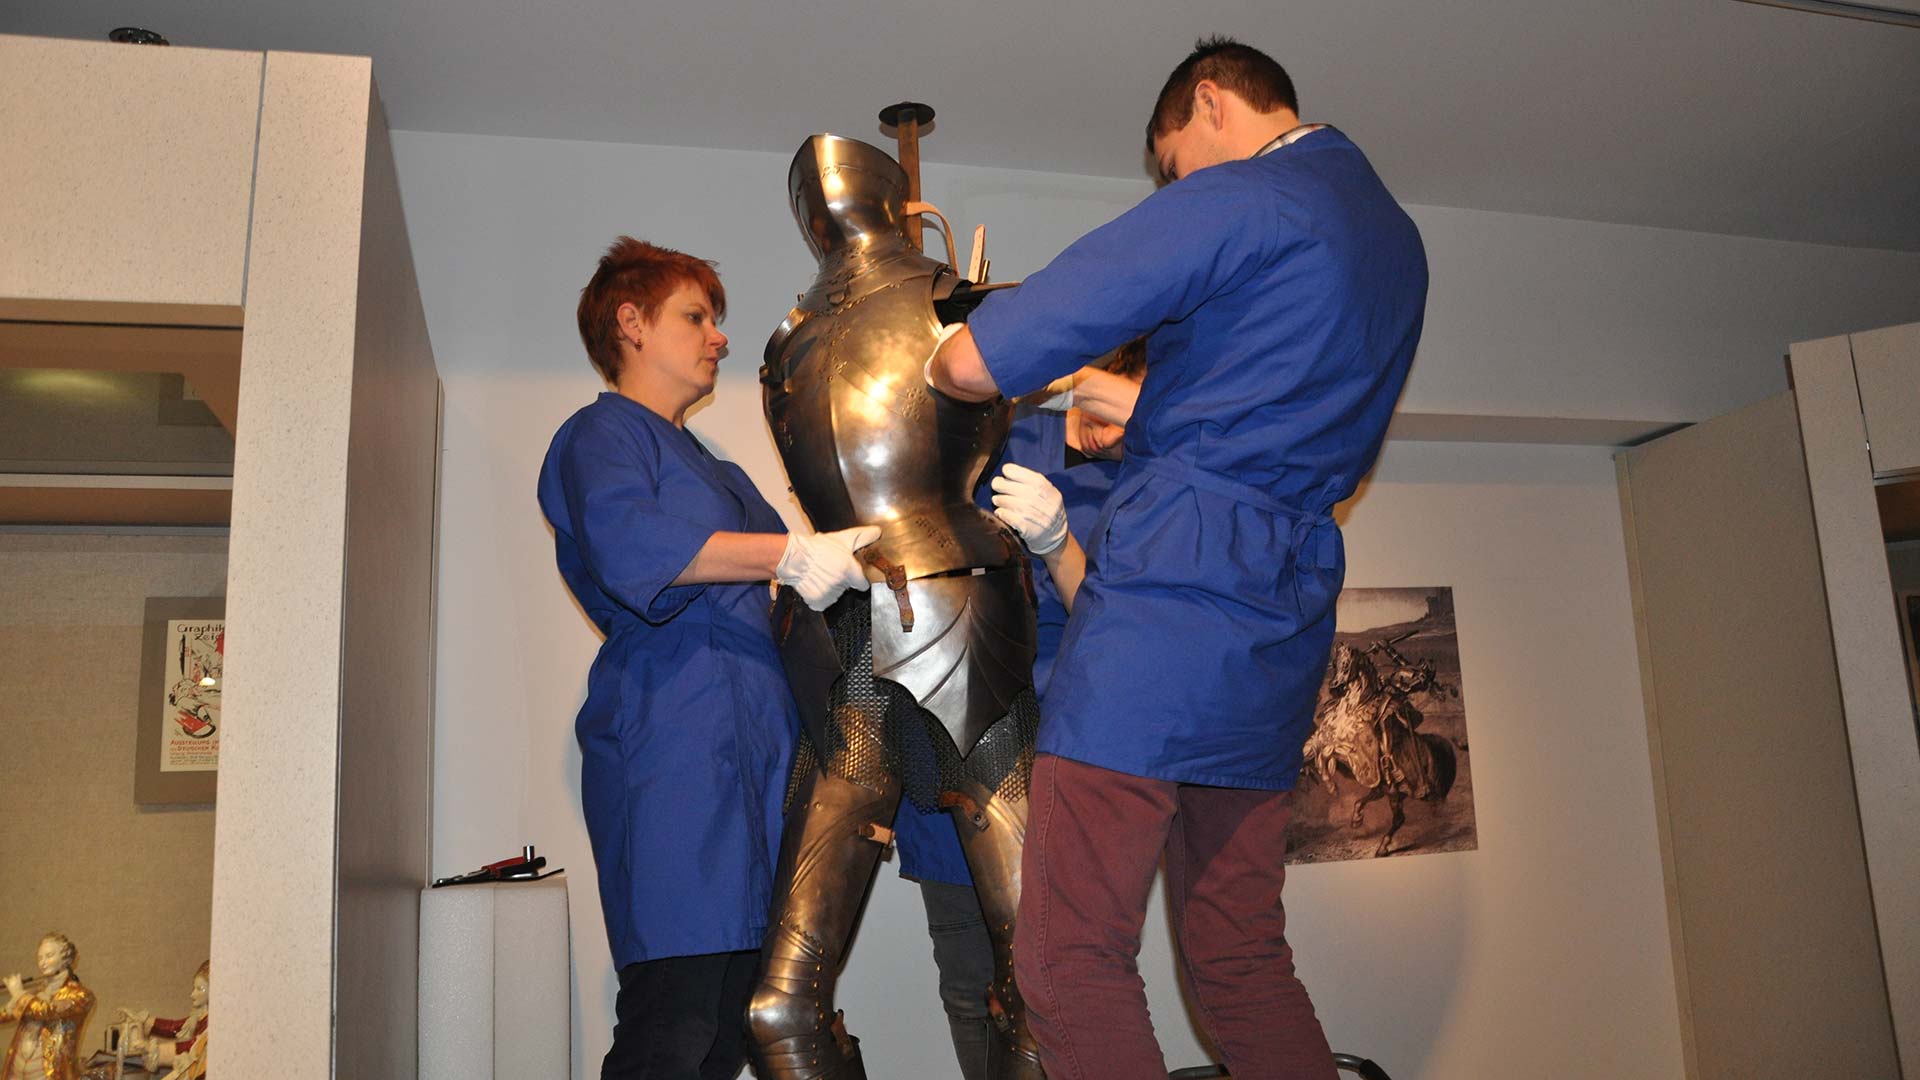 Reproduction of gothic armor returns to exhibit overview image